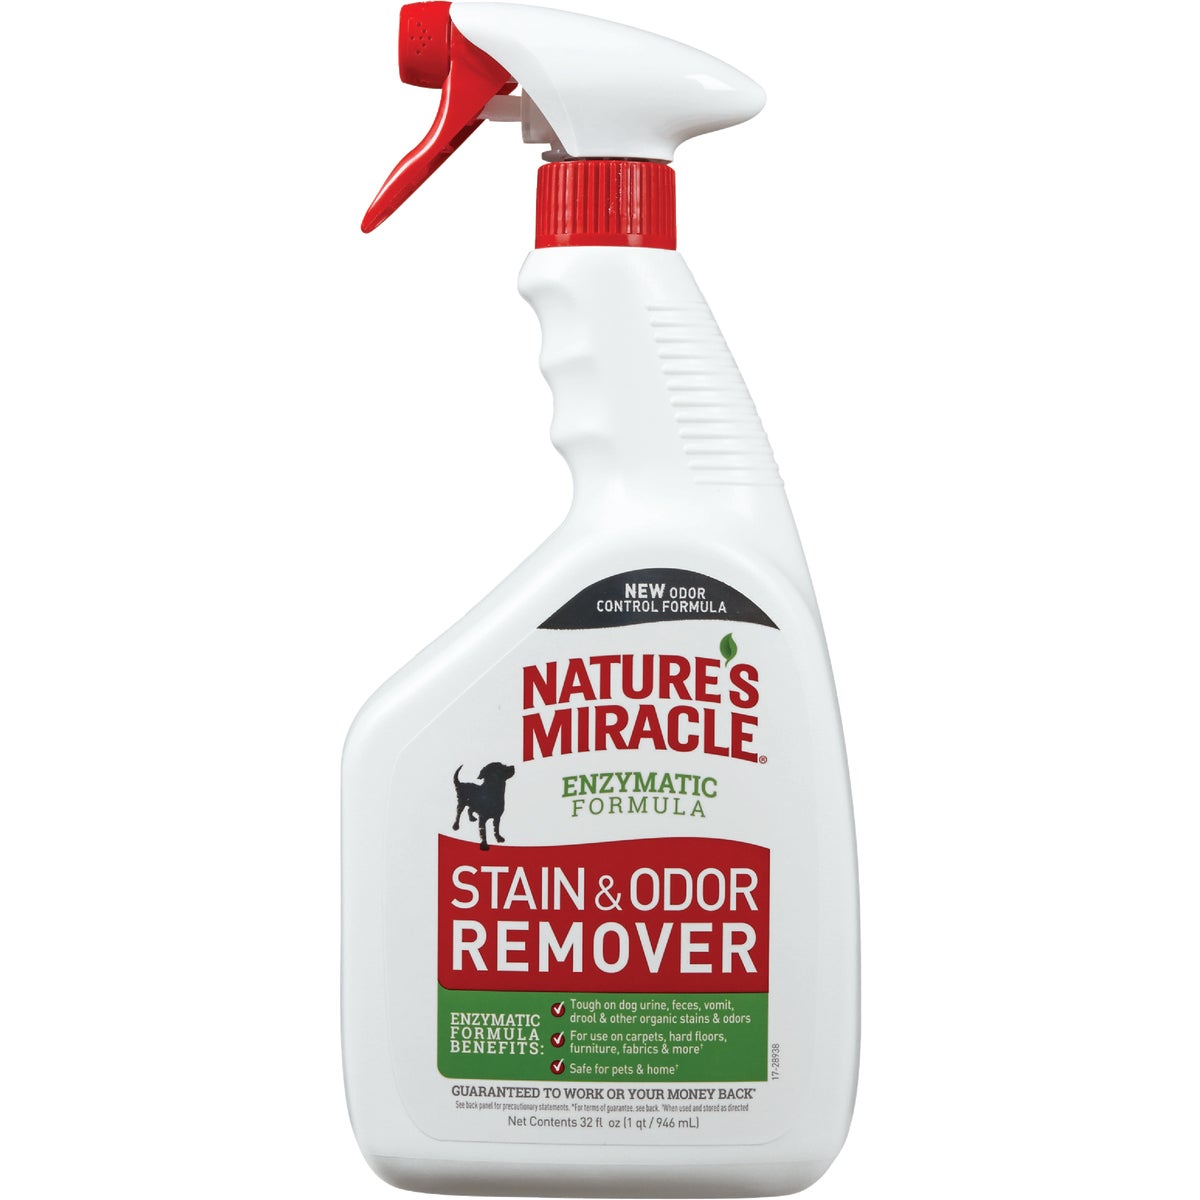 Item 801067, Nature's Miracle stain and odor remover is the ideal solution for any pet 